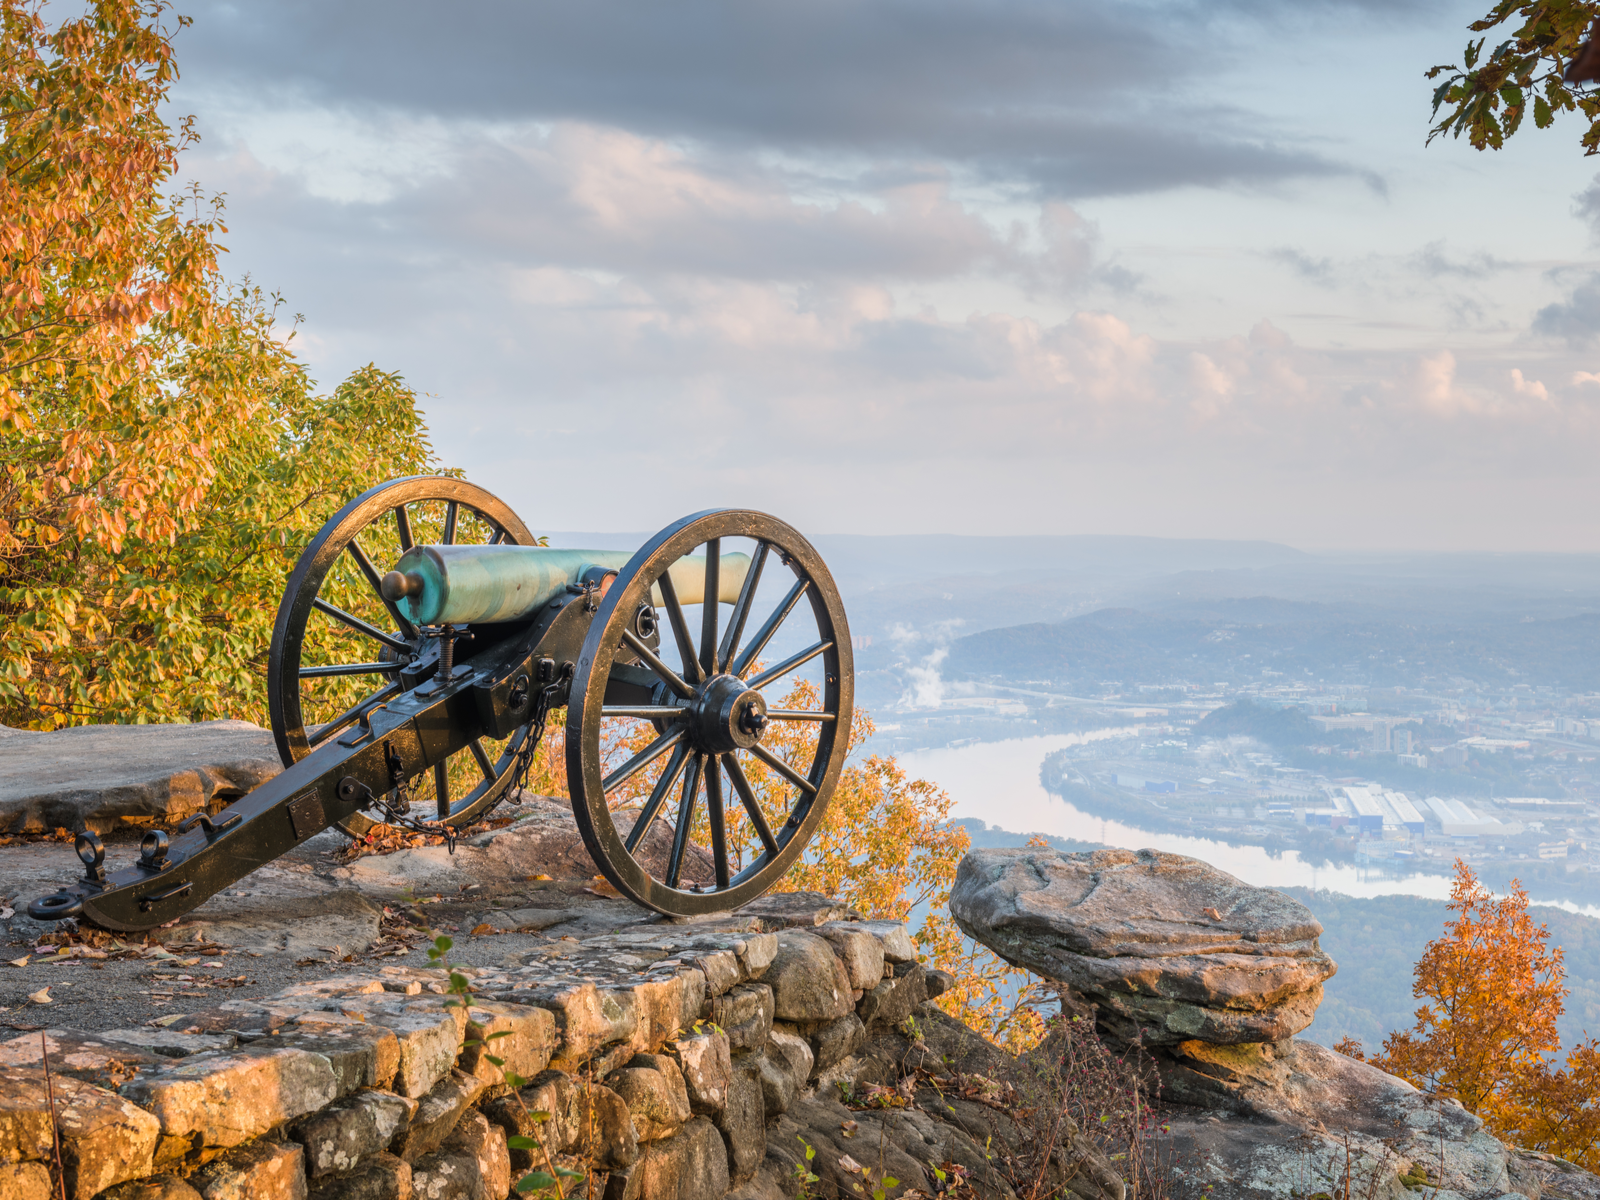 The famed Point Park Civil War Cannon Monument placed on Lookout Mountain's overlooking view of Chattanooga Downtown, one of the best places to visit in Tennessee